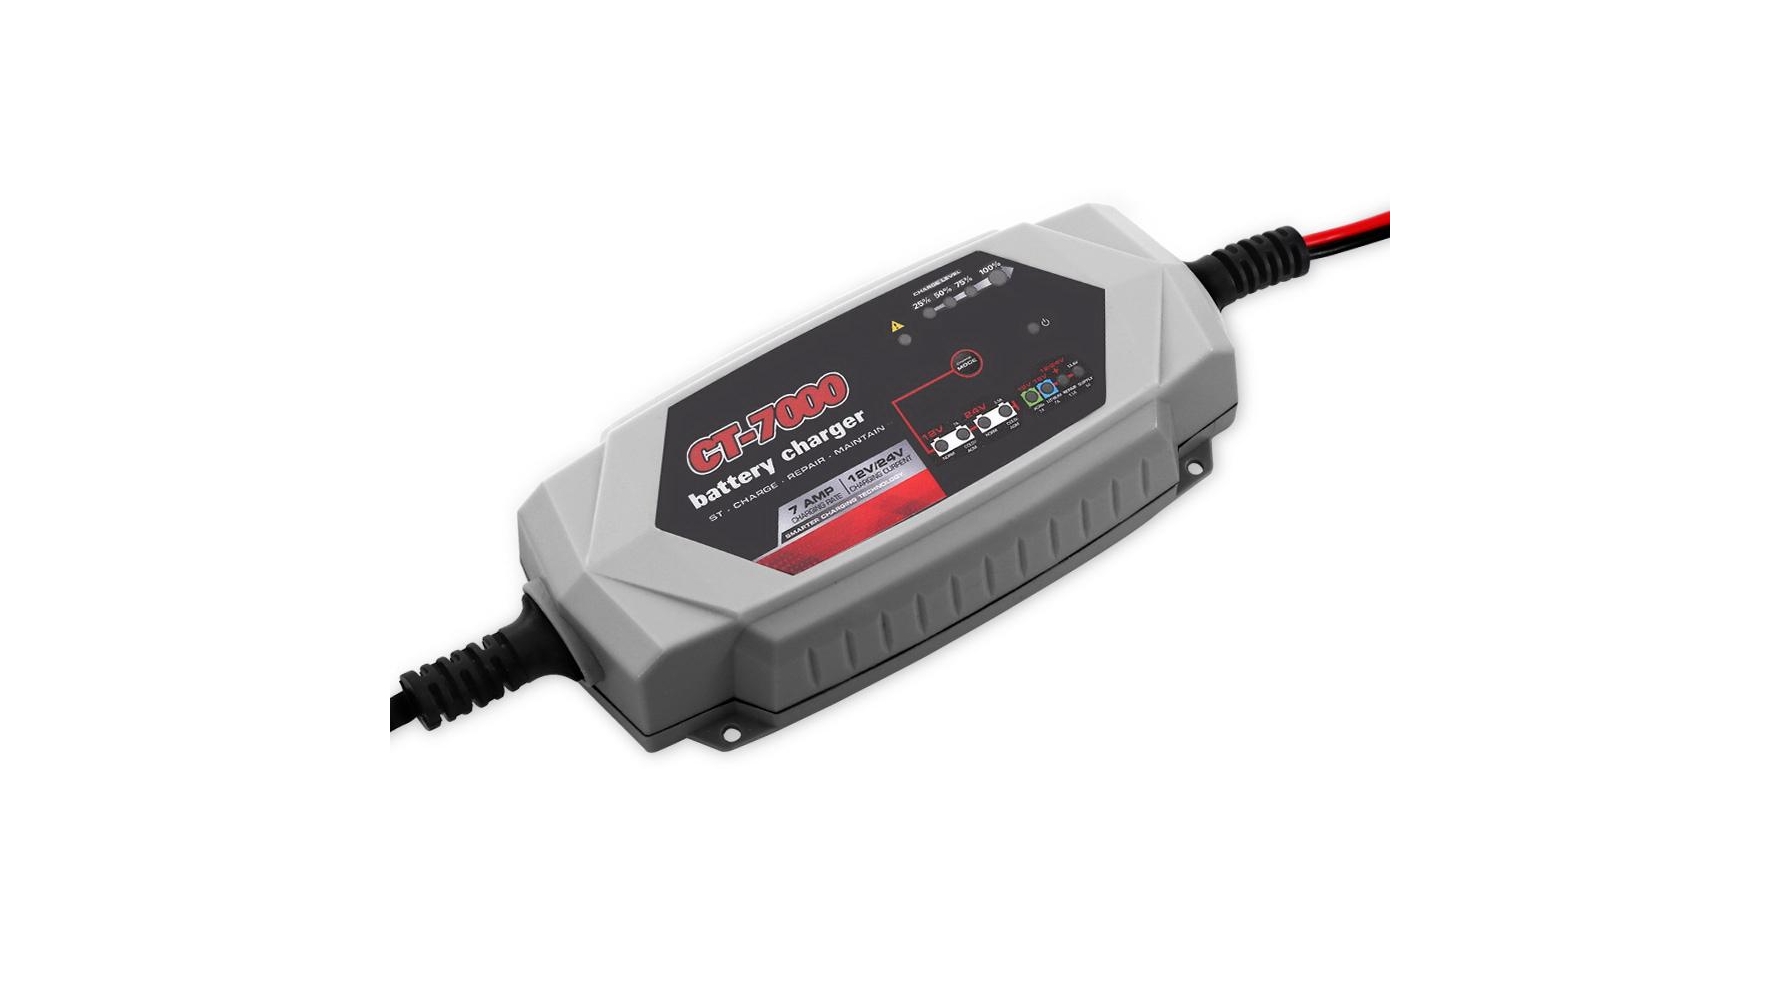 Röhr Battery Charger 10 Amp 6V 12V DFC-10P Intelligent Turbo/Trickle with Battery Repair and Maintainer Technology 